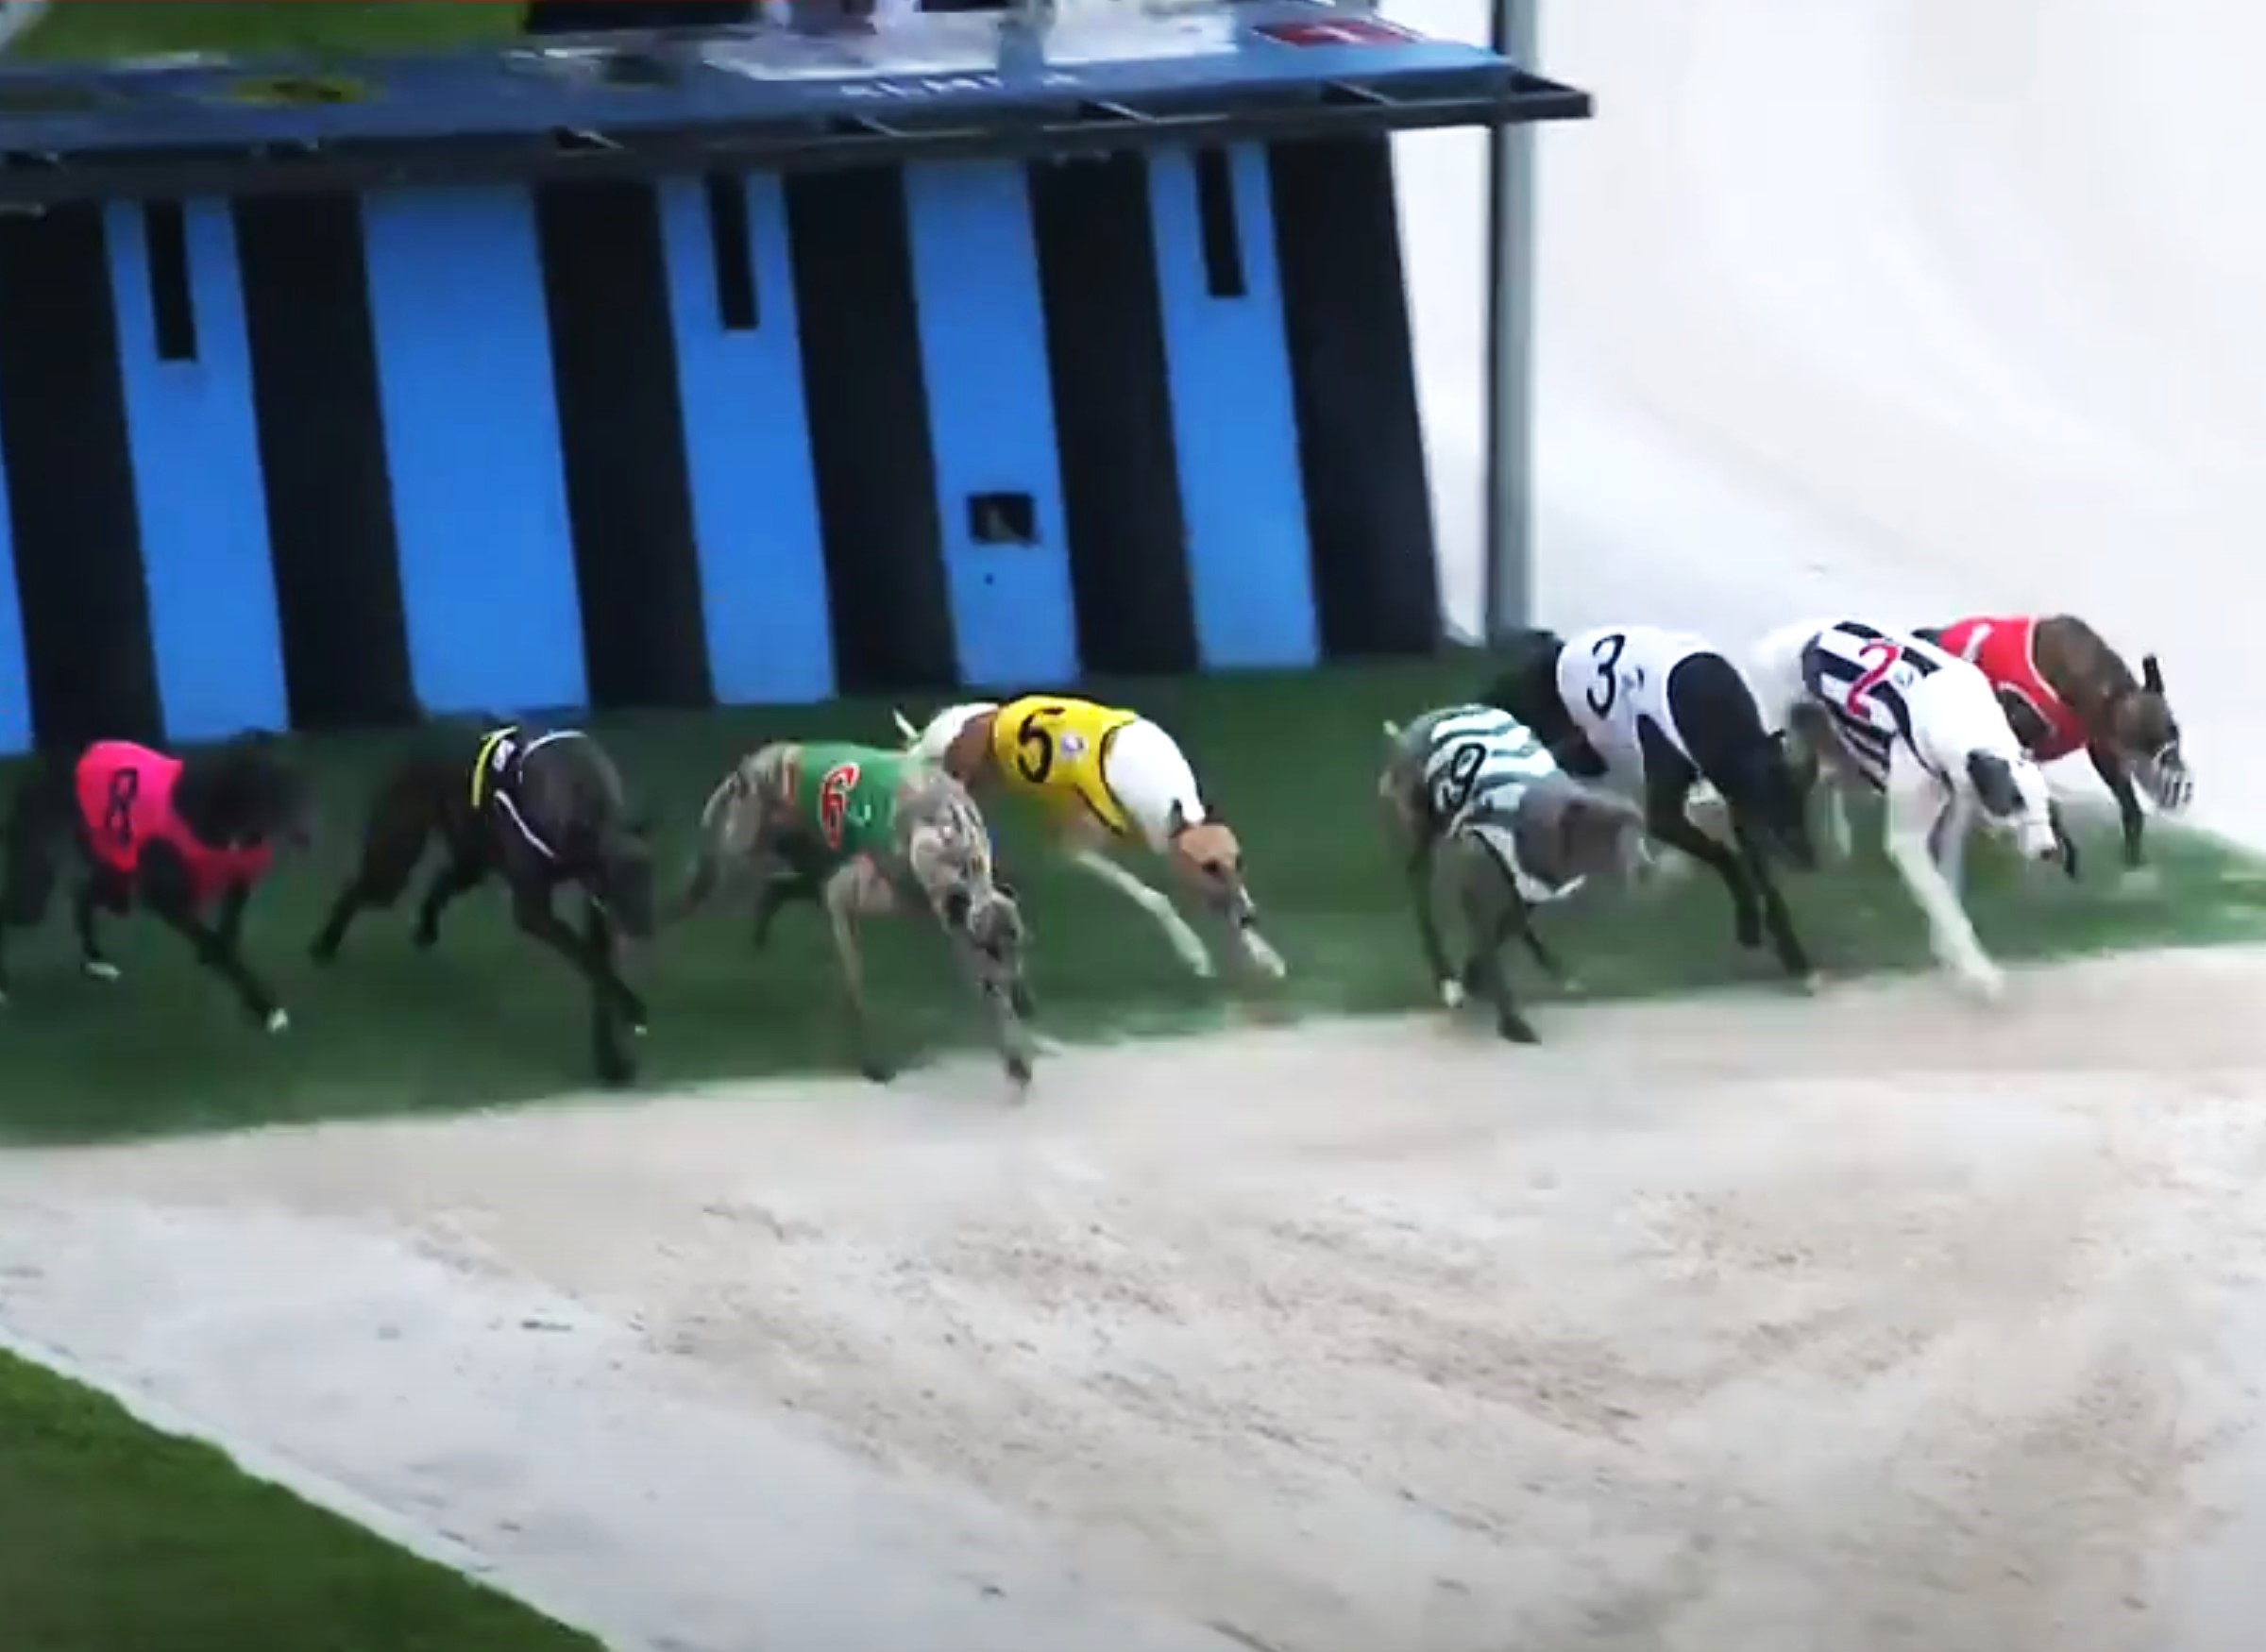 Eight dogs race on a greyhound racing track.